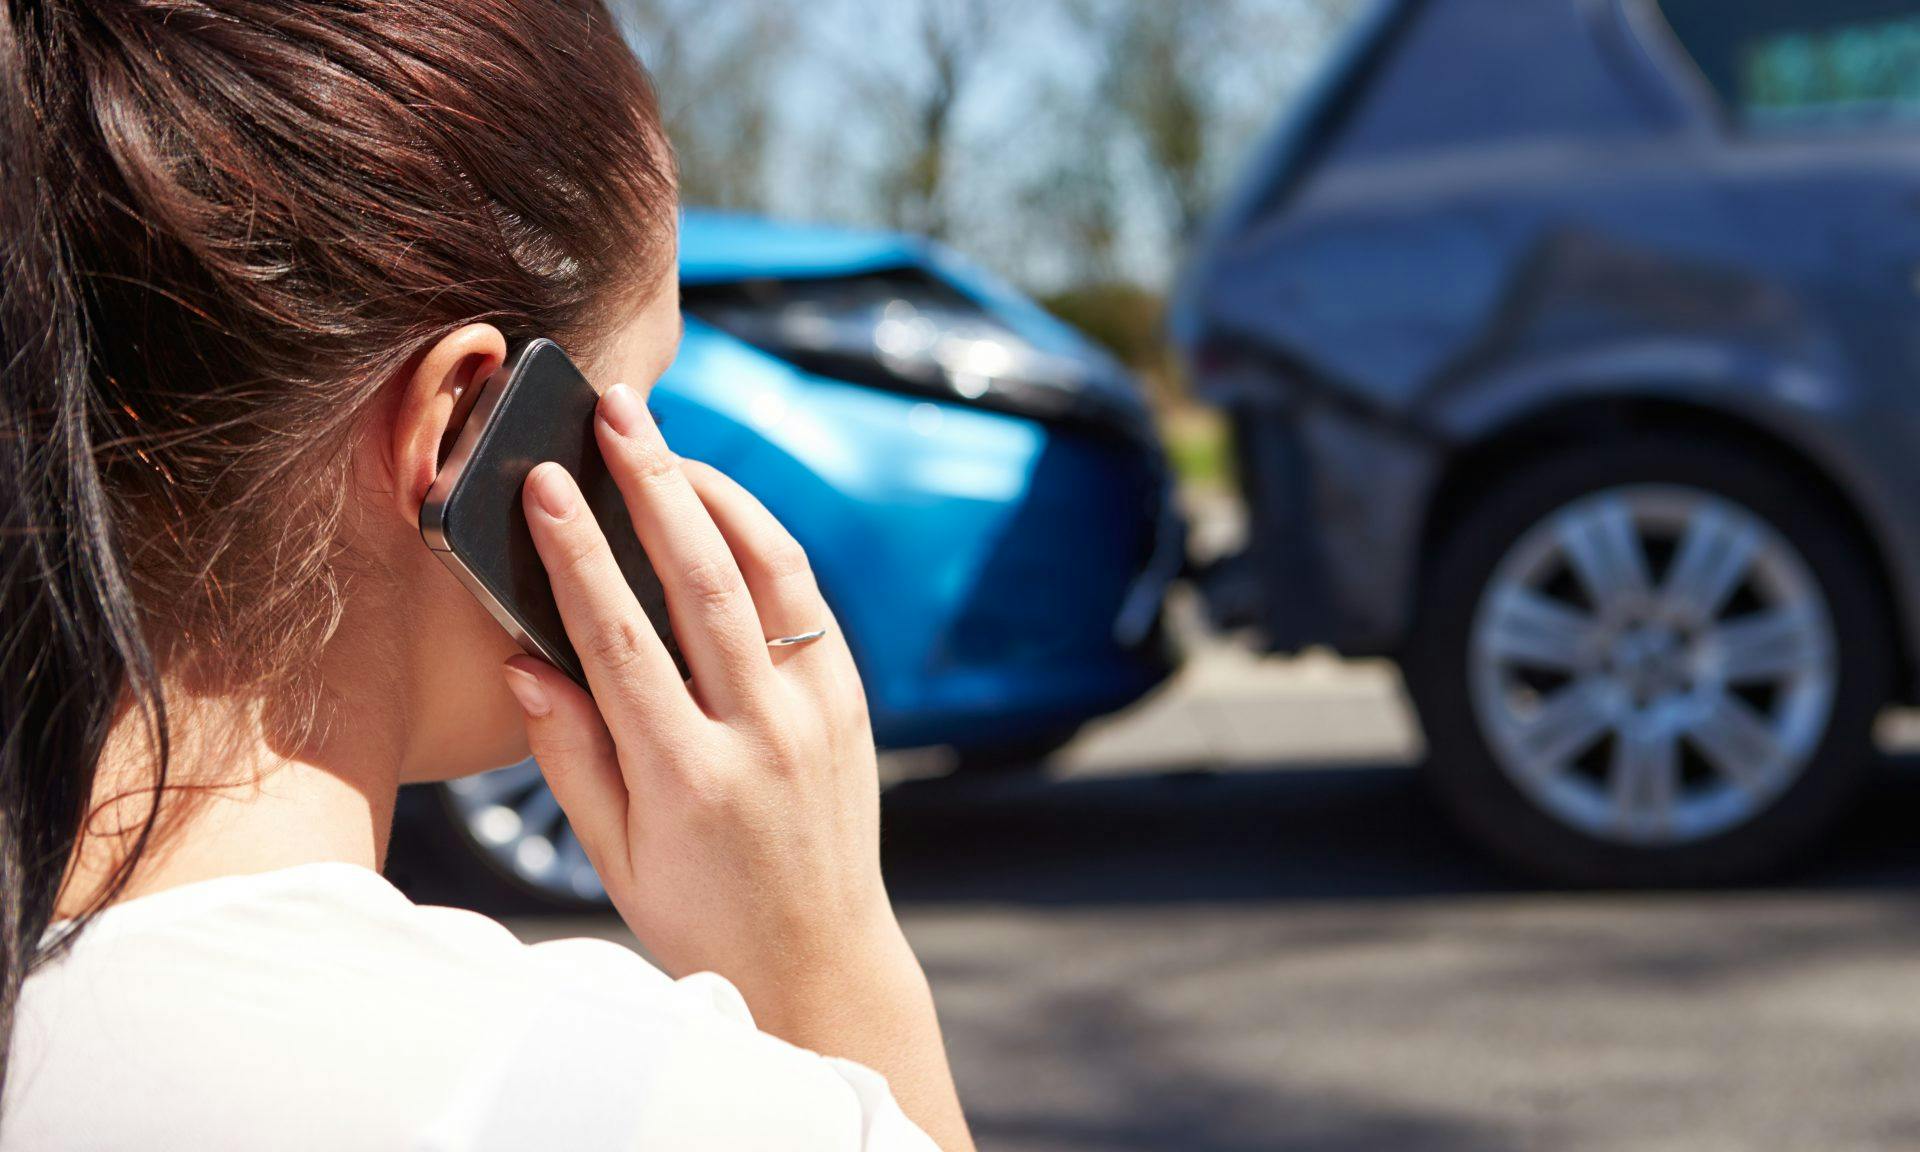 women on phone in front of car accident